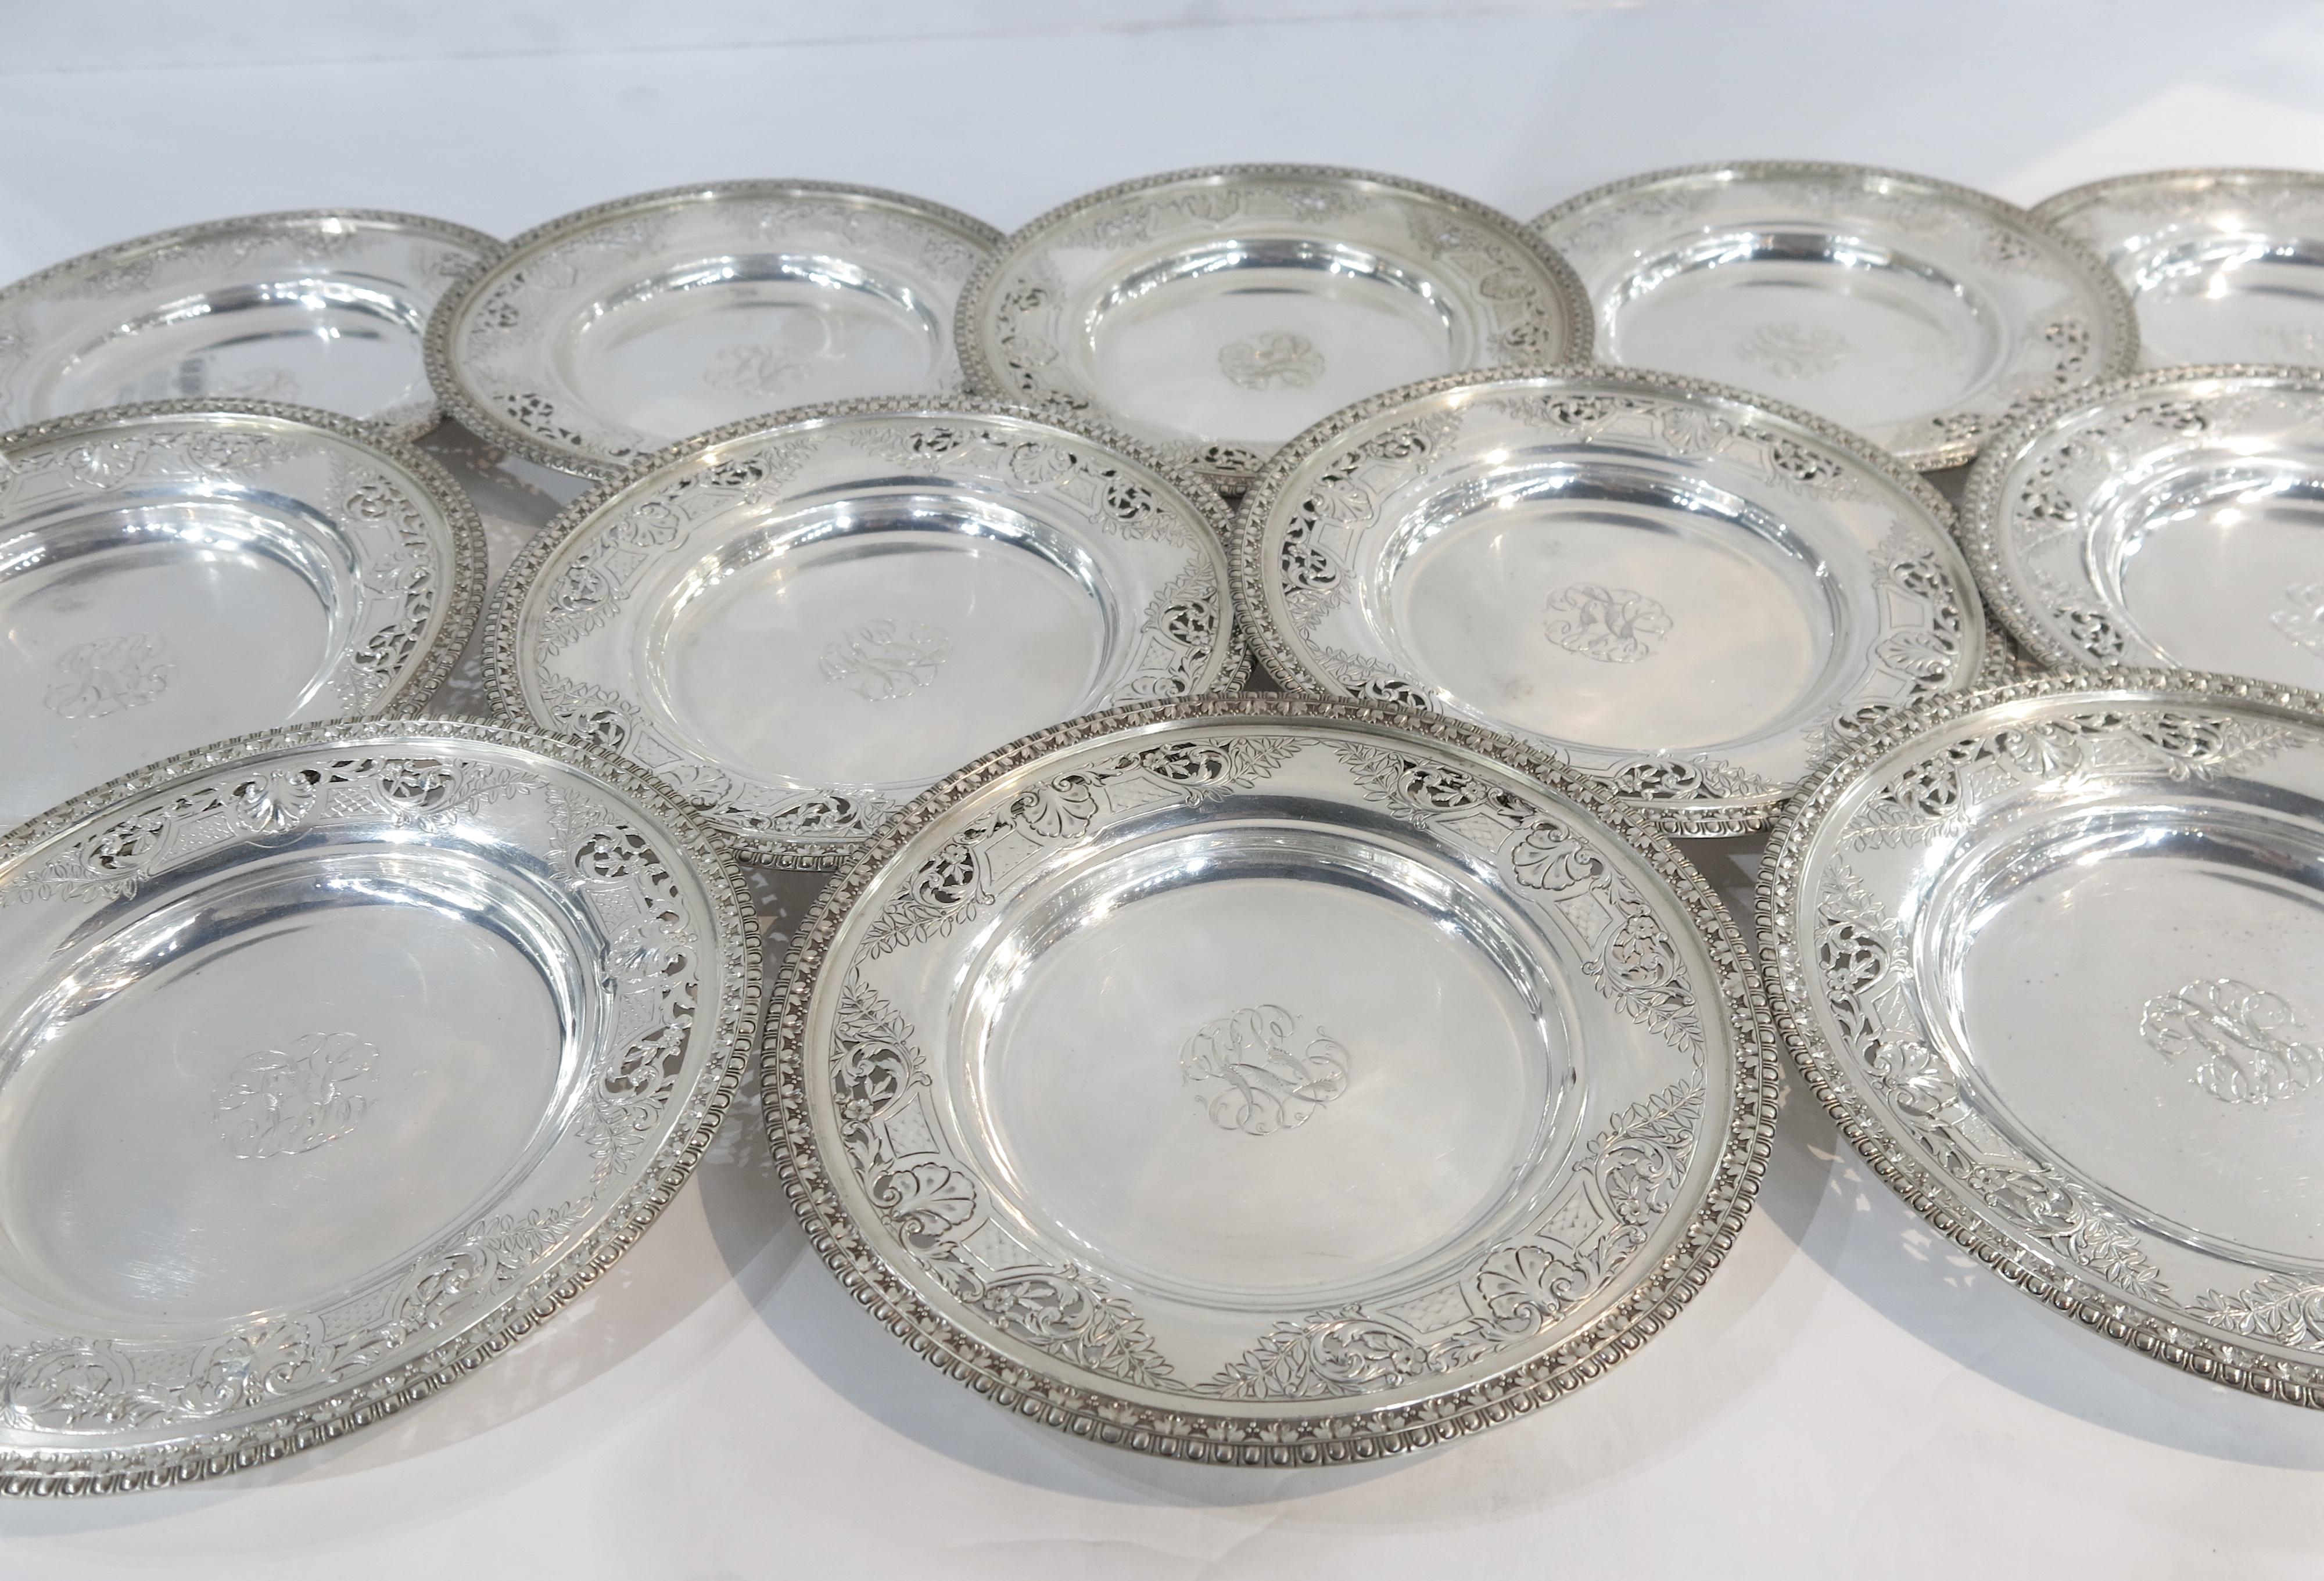 12 Antique sterling silver dessert plates made by Black, Starr & Frost, circa 1900. Each with a cast border and hand chased and pierced decoration, centred by a beautiful hand engraved monogram.
Each plate is marked on the underside with the